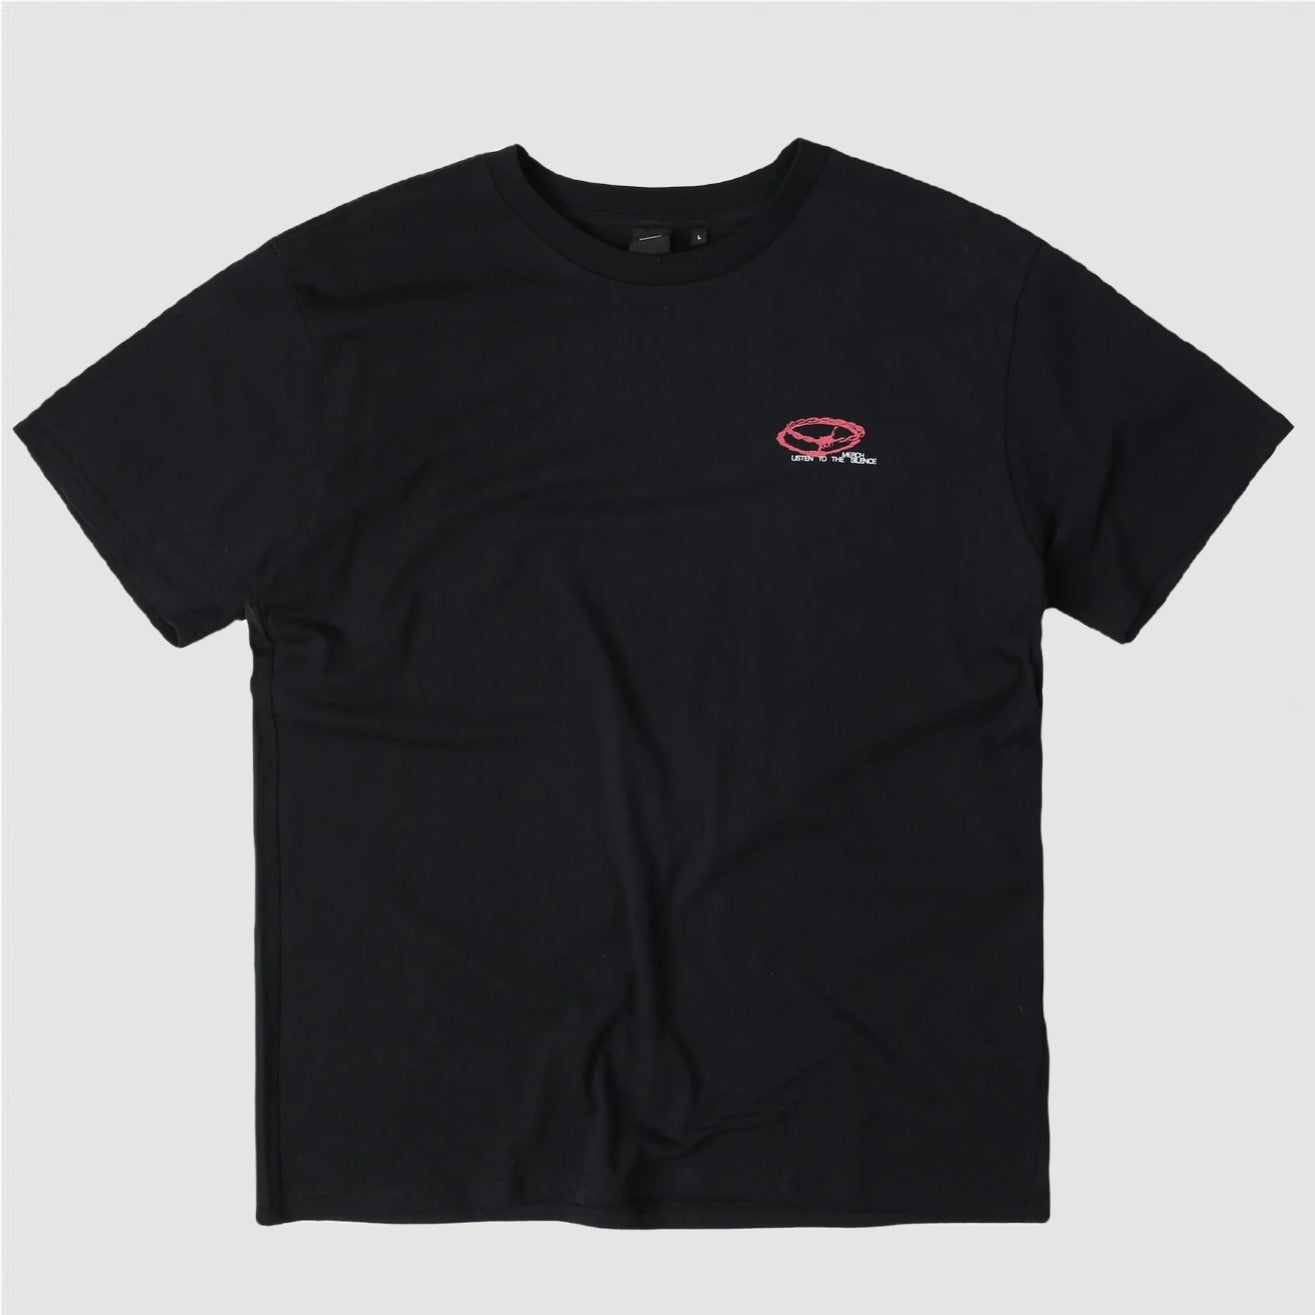 Former Diffuse Tee Black